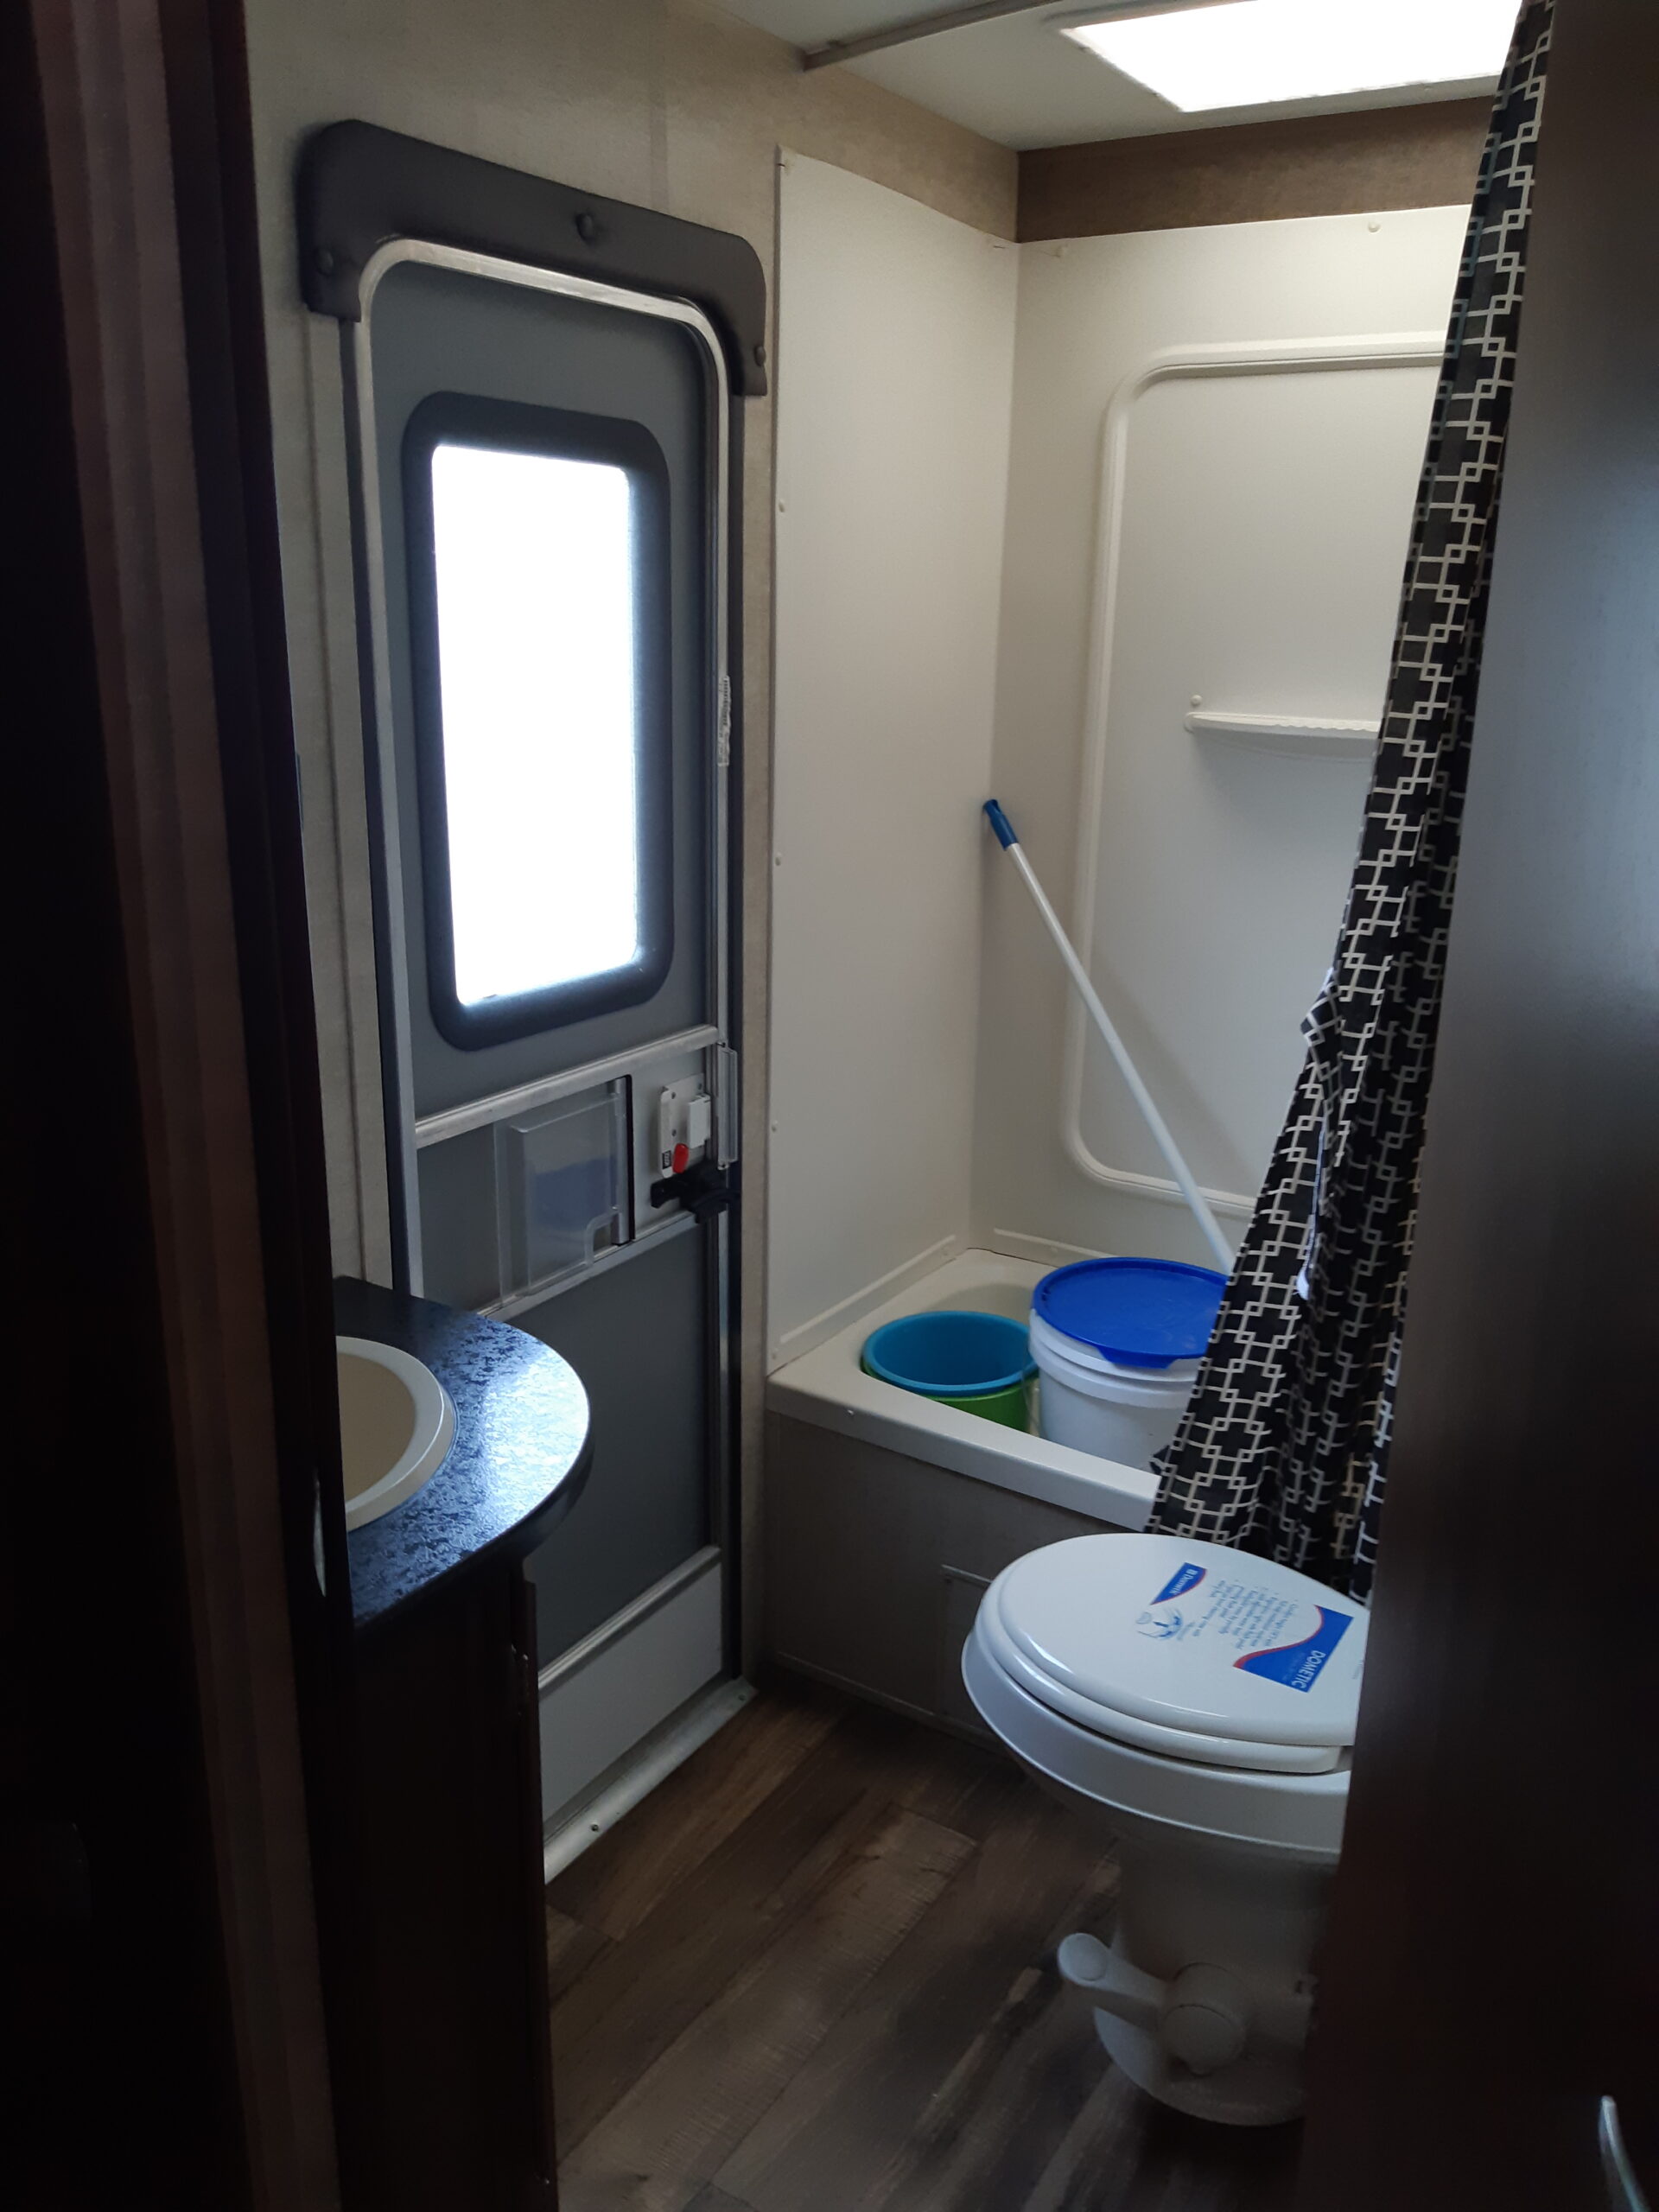 RV renovation - after of the bathroom